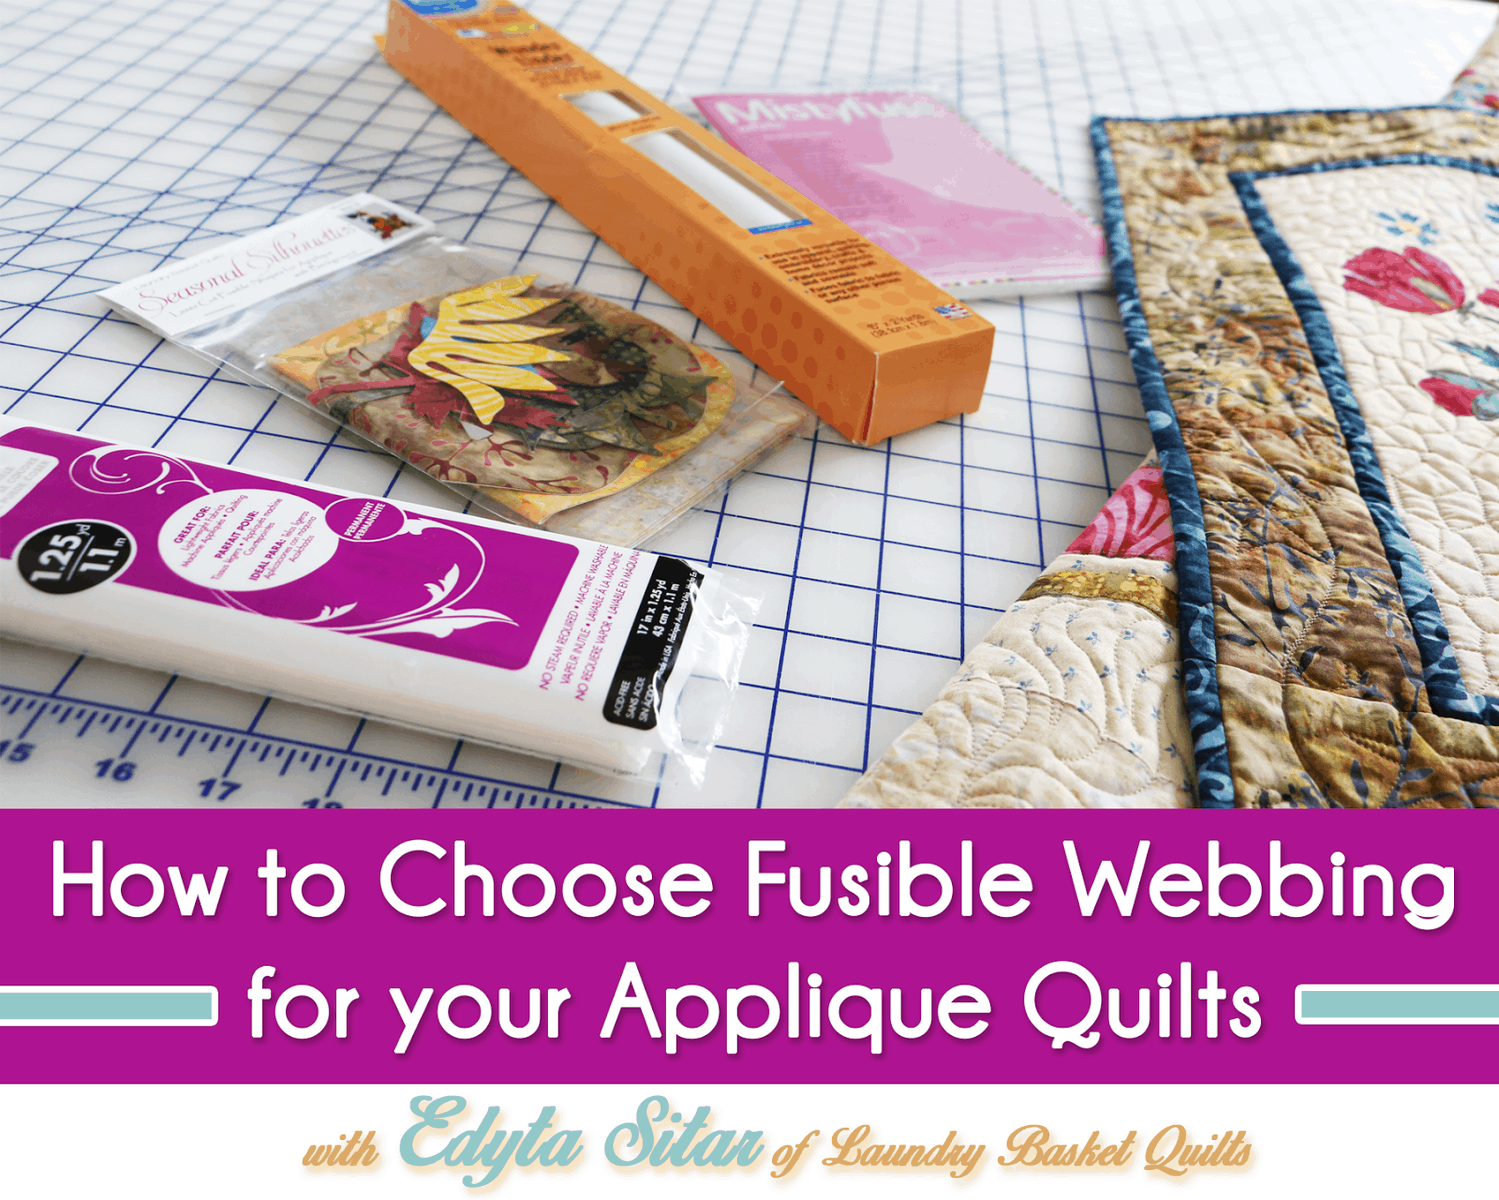 How to Choose Fusible Webbing for your Applique Quilts with Edyta Sitar -  The Jolly Jabber Quilting Blog